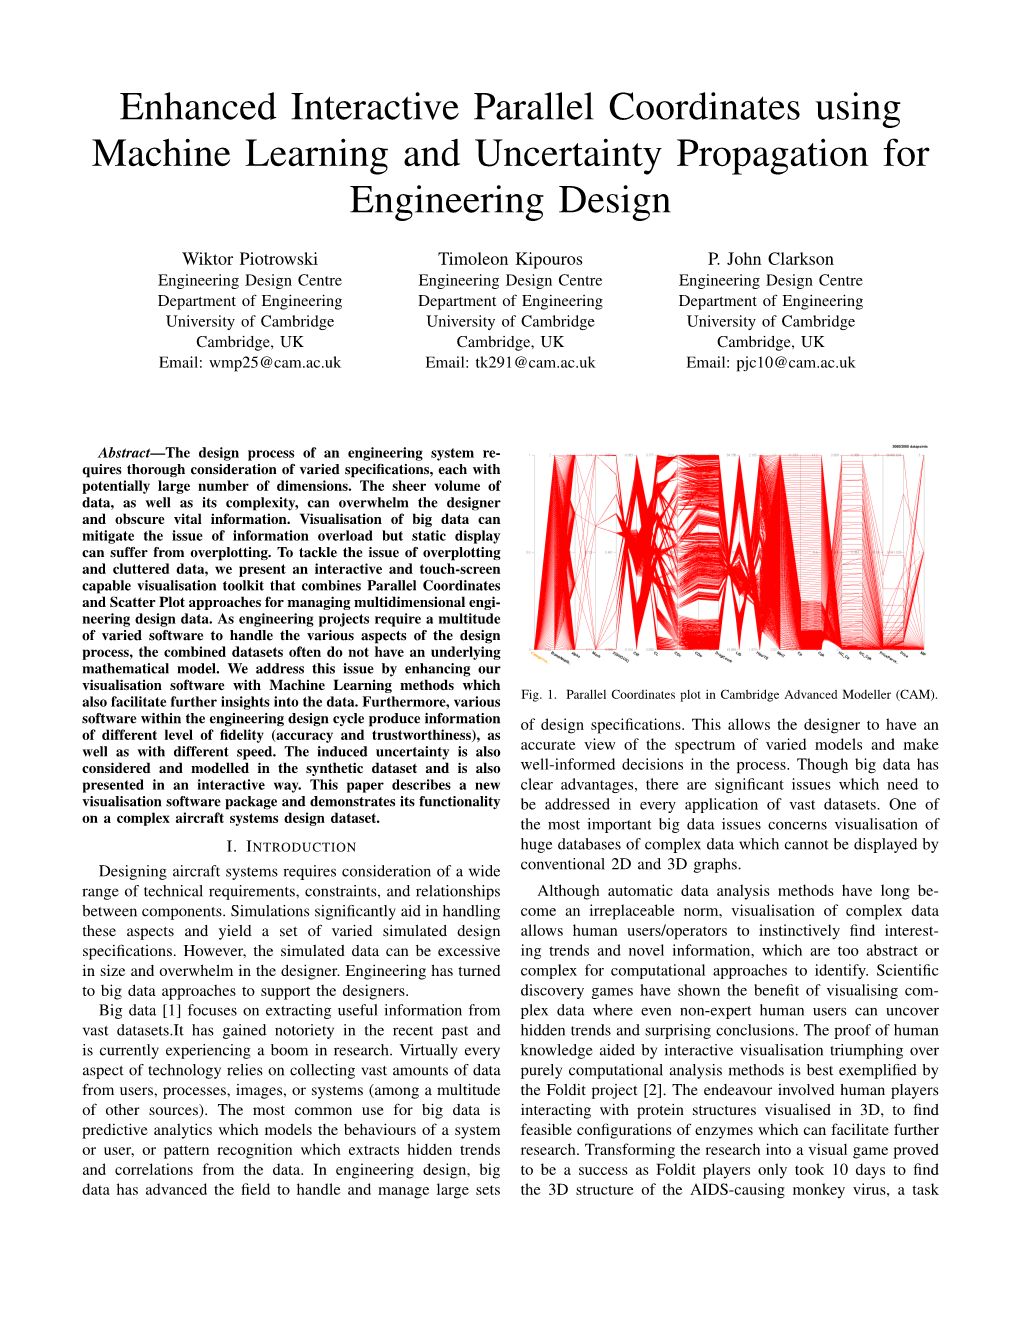 Enhanced Interactive Parallel Coordinates Using Machine Learning and Uncertainty Propagation for Engineering Design